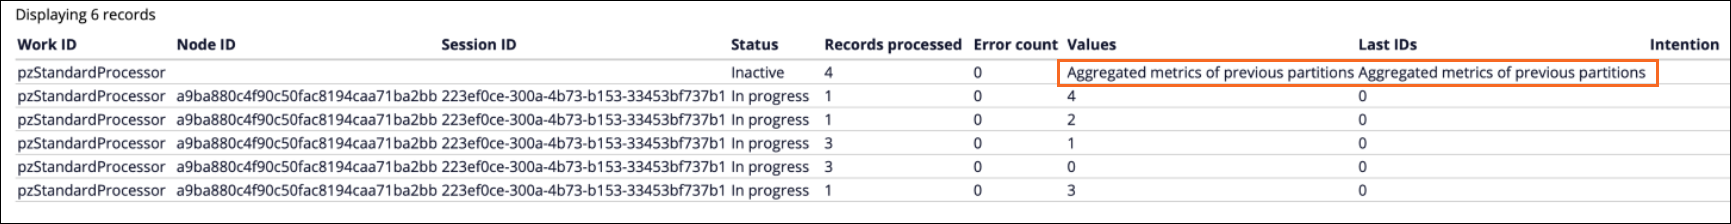 According to the aggregated metrics of previously active partitions, four records were processed by these partitions.